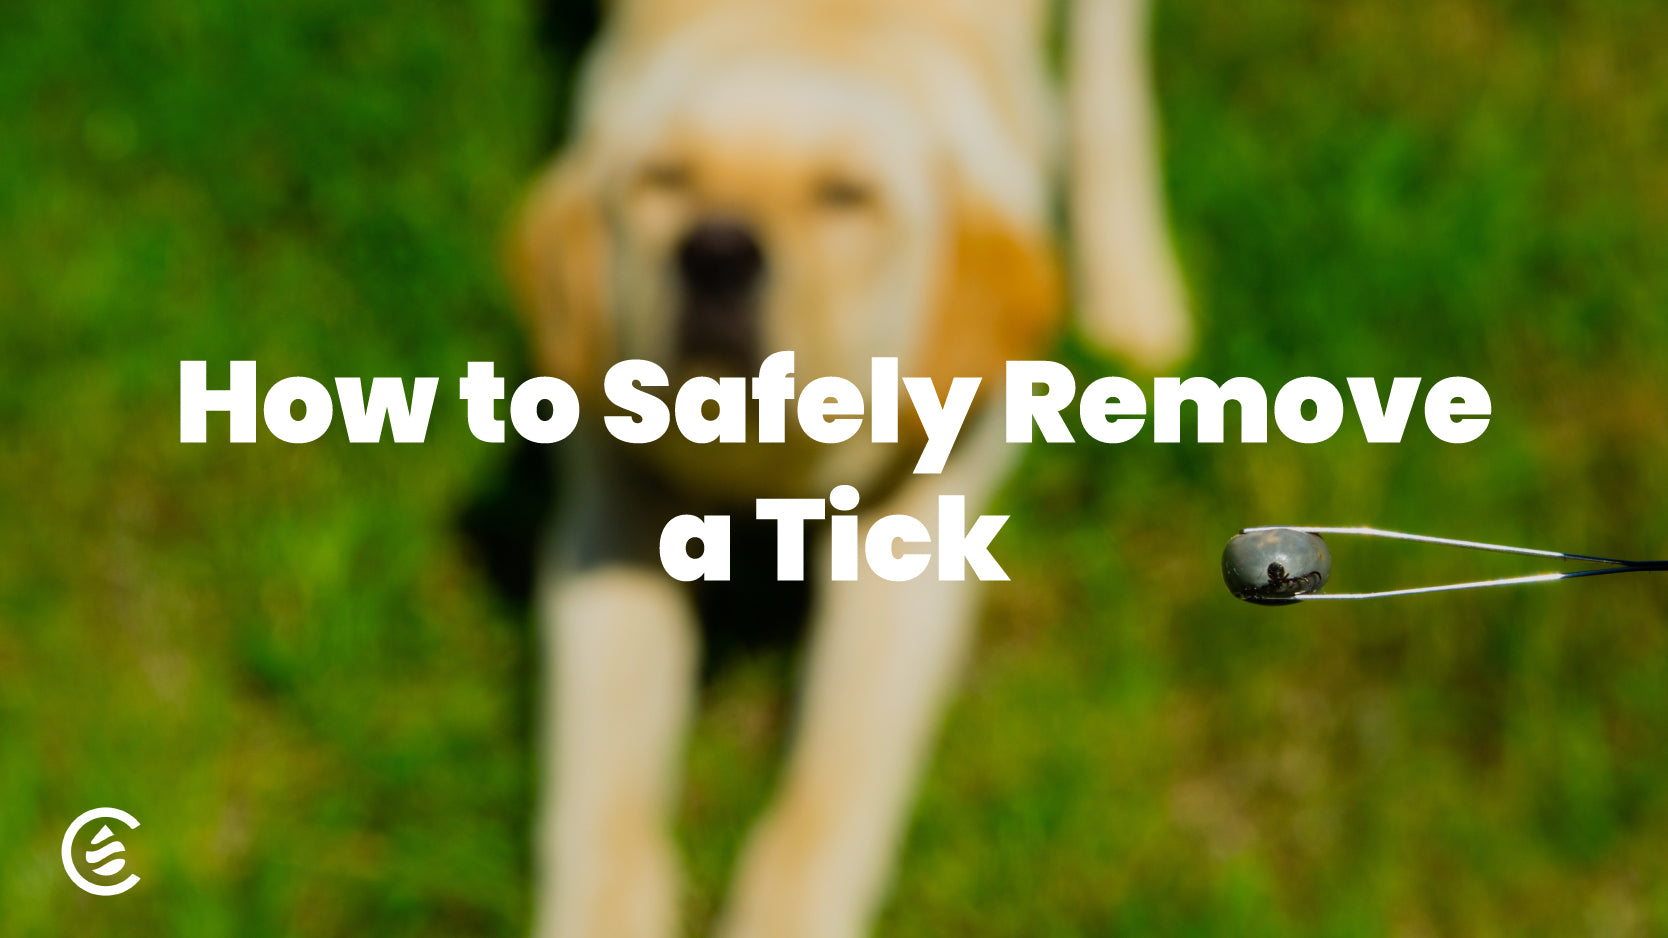 The Cedarcide guide for safely removing a tick